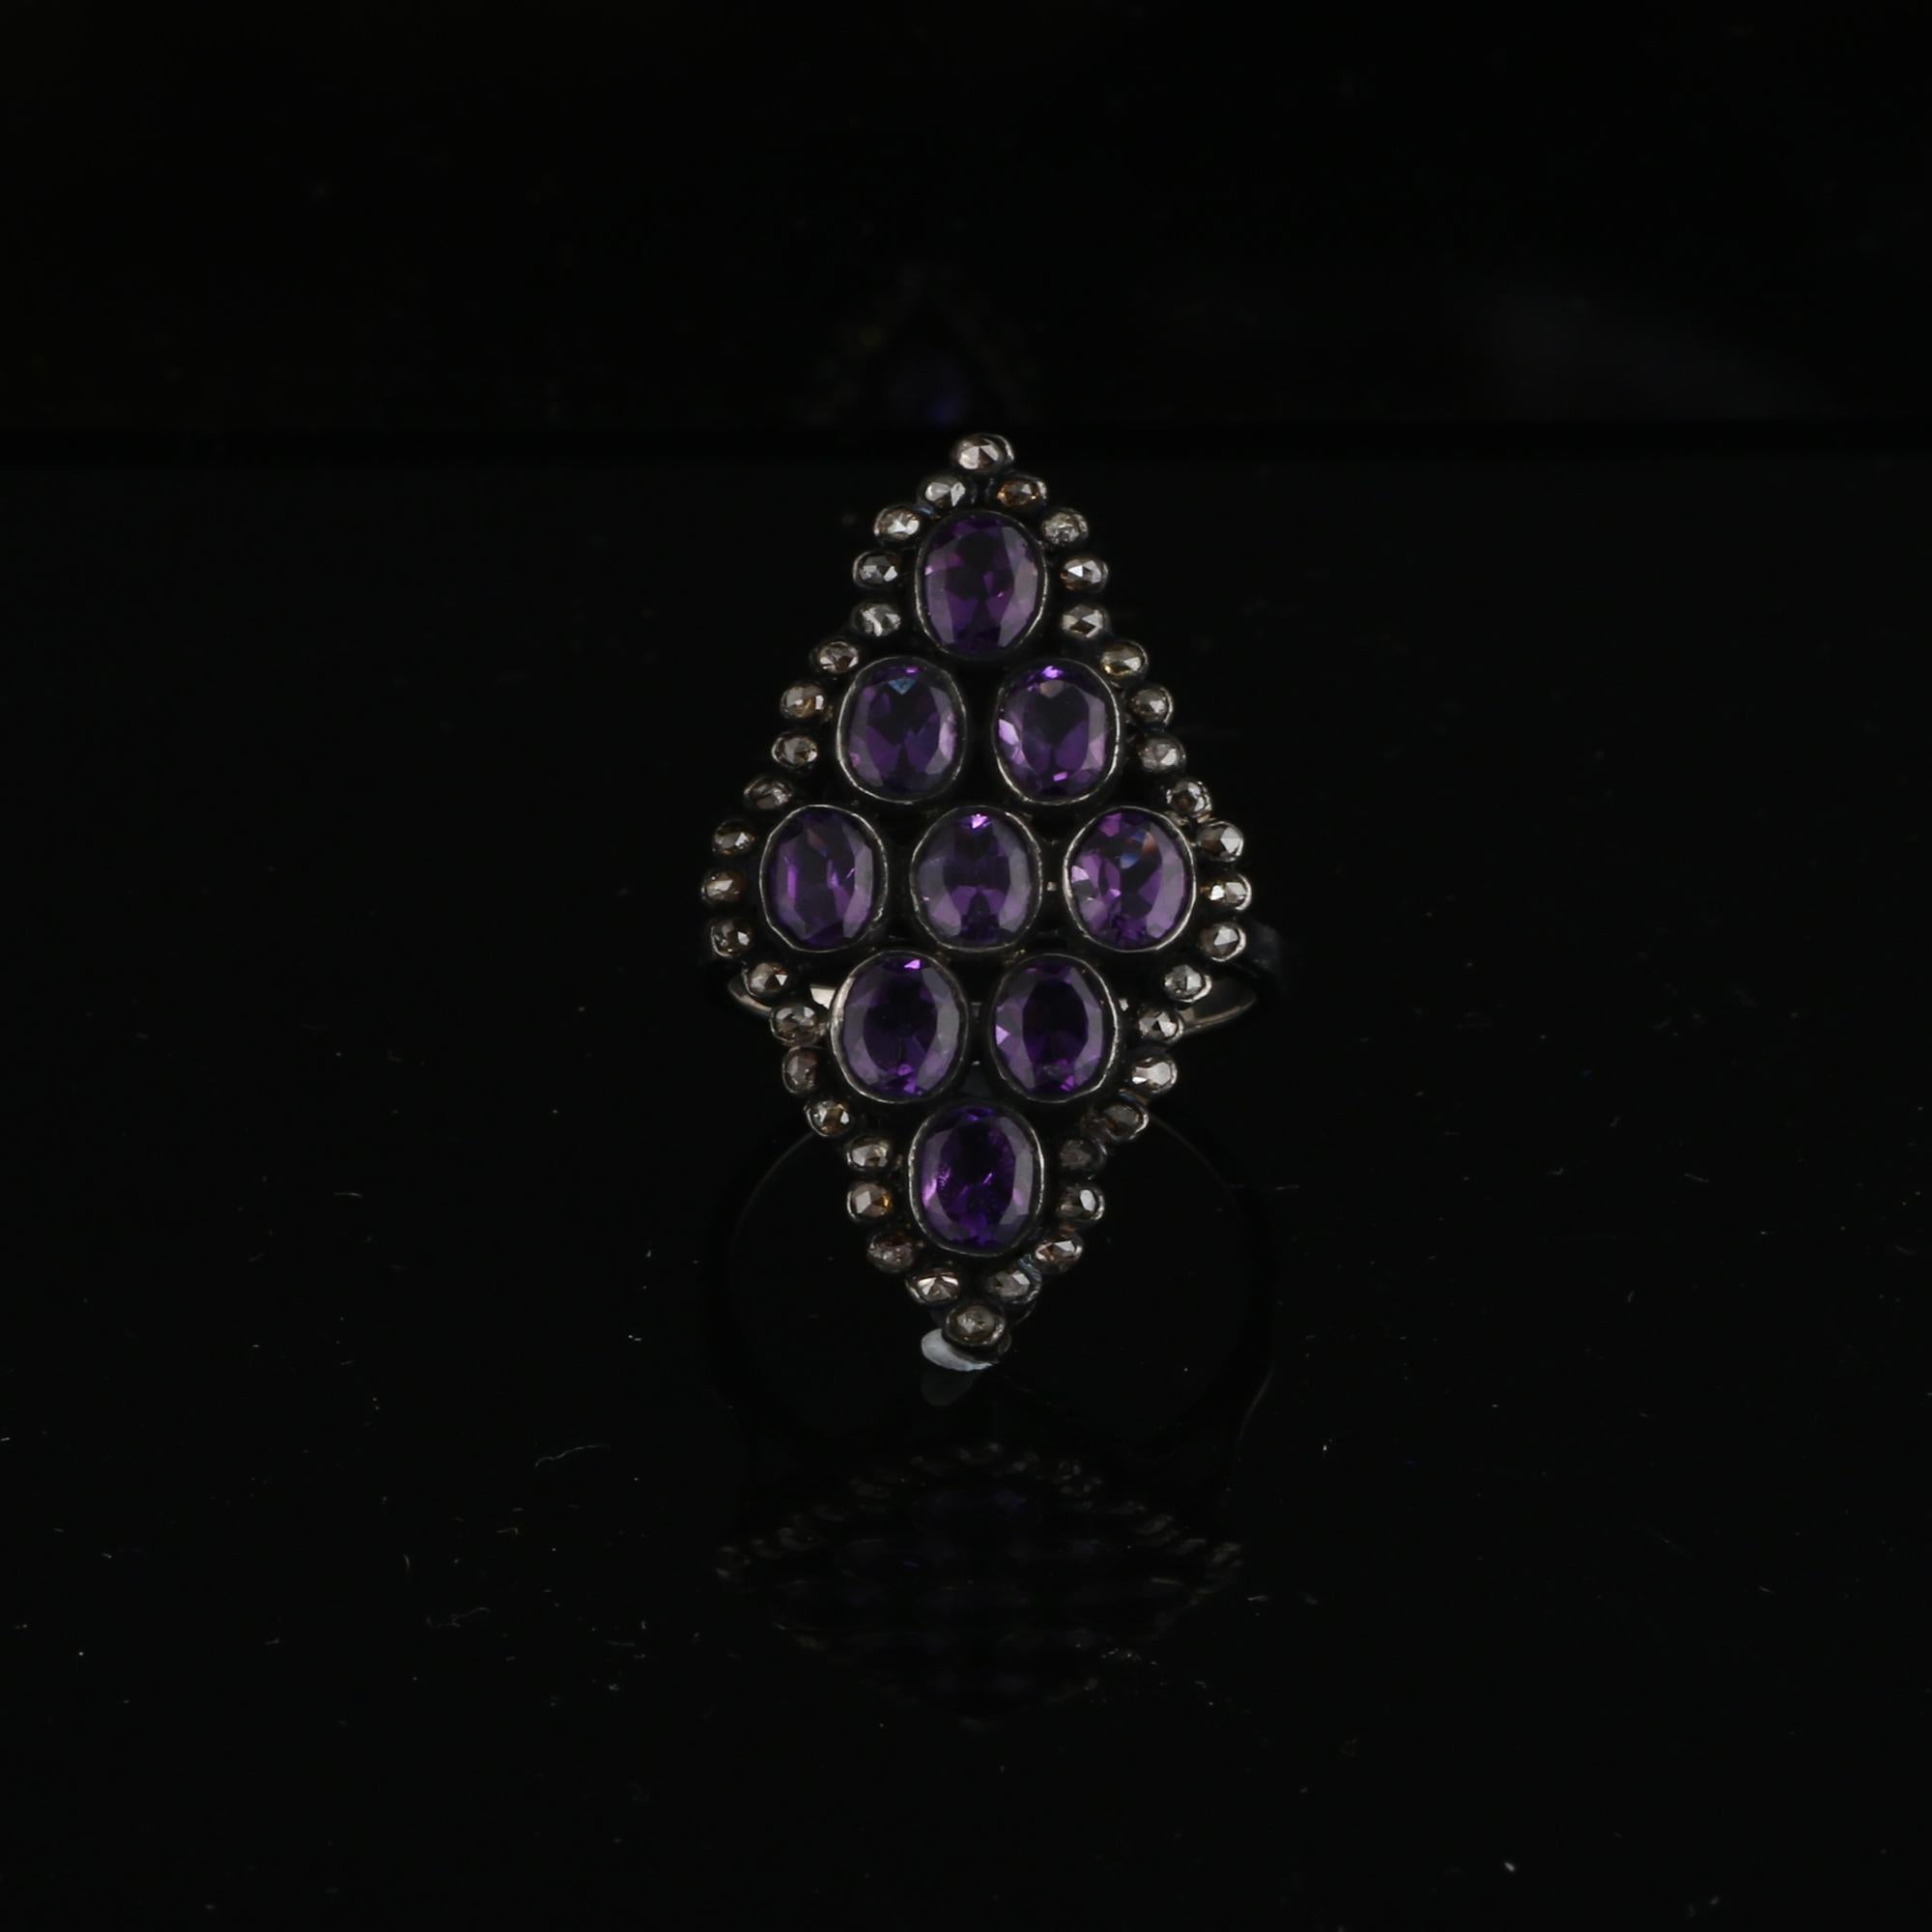 Item details:-

✦ SKU:- ESRG00210

✦ Material :- Silver
✦ Gemstone Specification:-
✧ Diamond
✧ Amethyst

✦ Approx. Diamond Weight : 0.95
✦ Approx. Silver Weight : 4.5
✦ Approx. Gross Weight : 5.5

Ring Size (US): 7

You will Get the same Product as